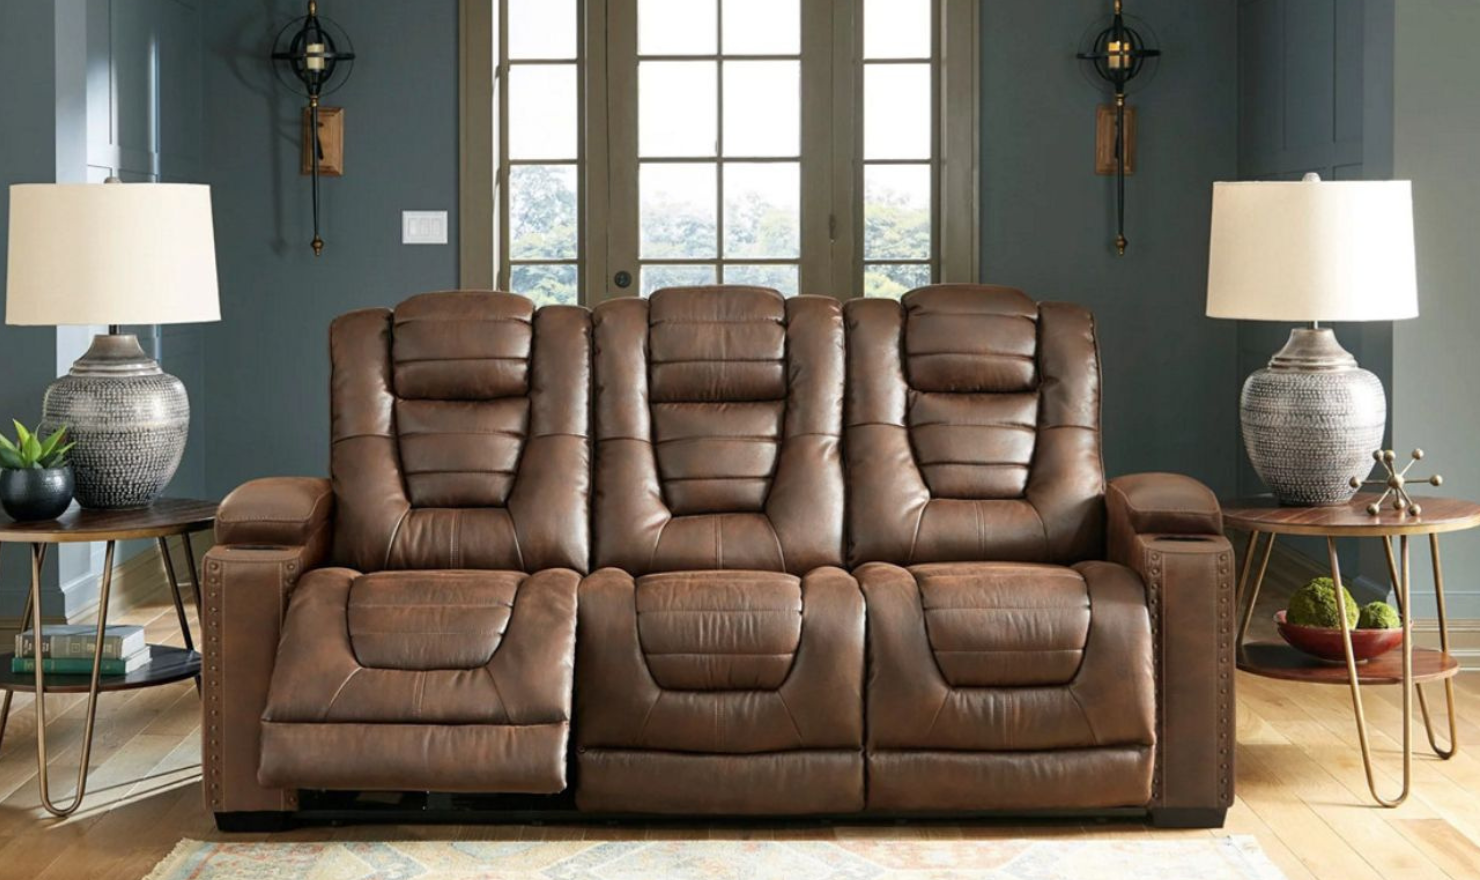 Things to Consider When Choosing a Loveseat